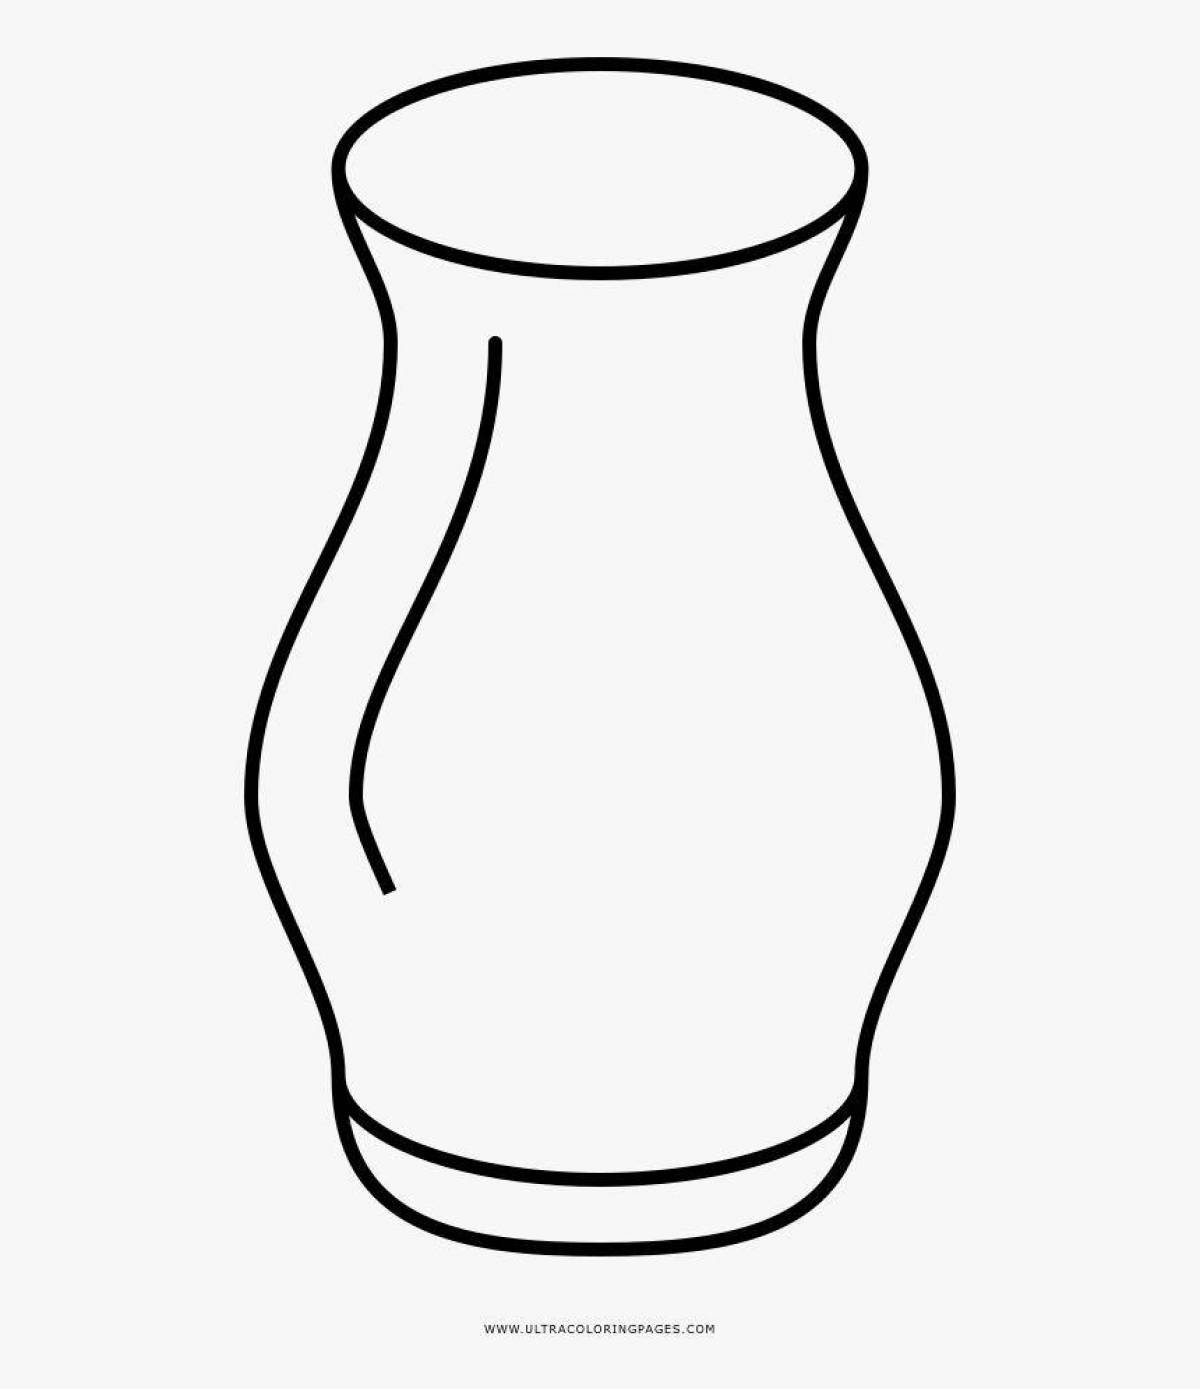 Great coloring vase for kids